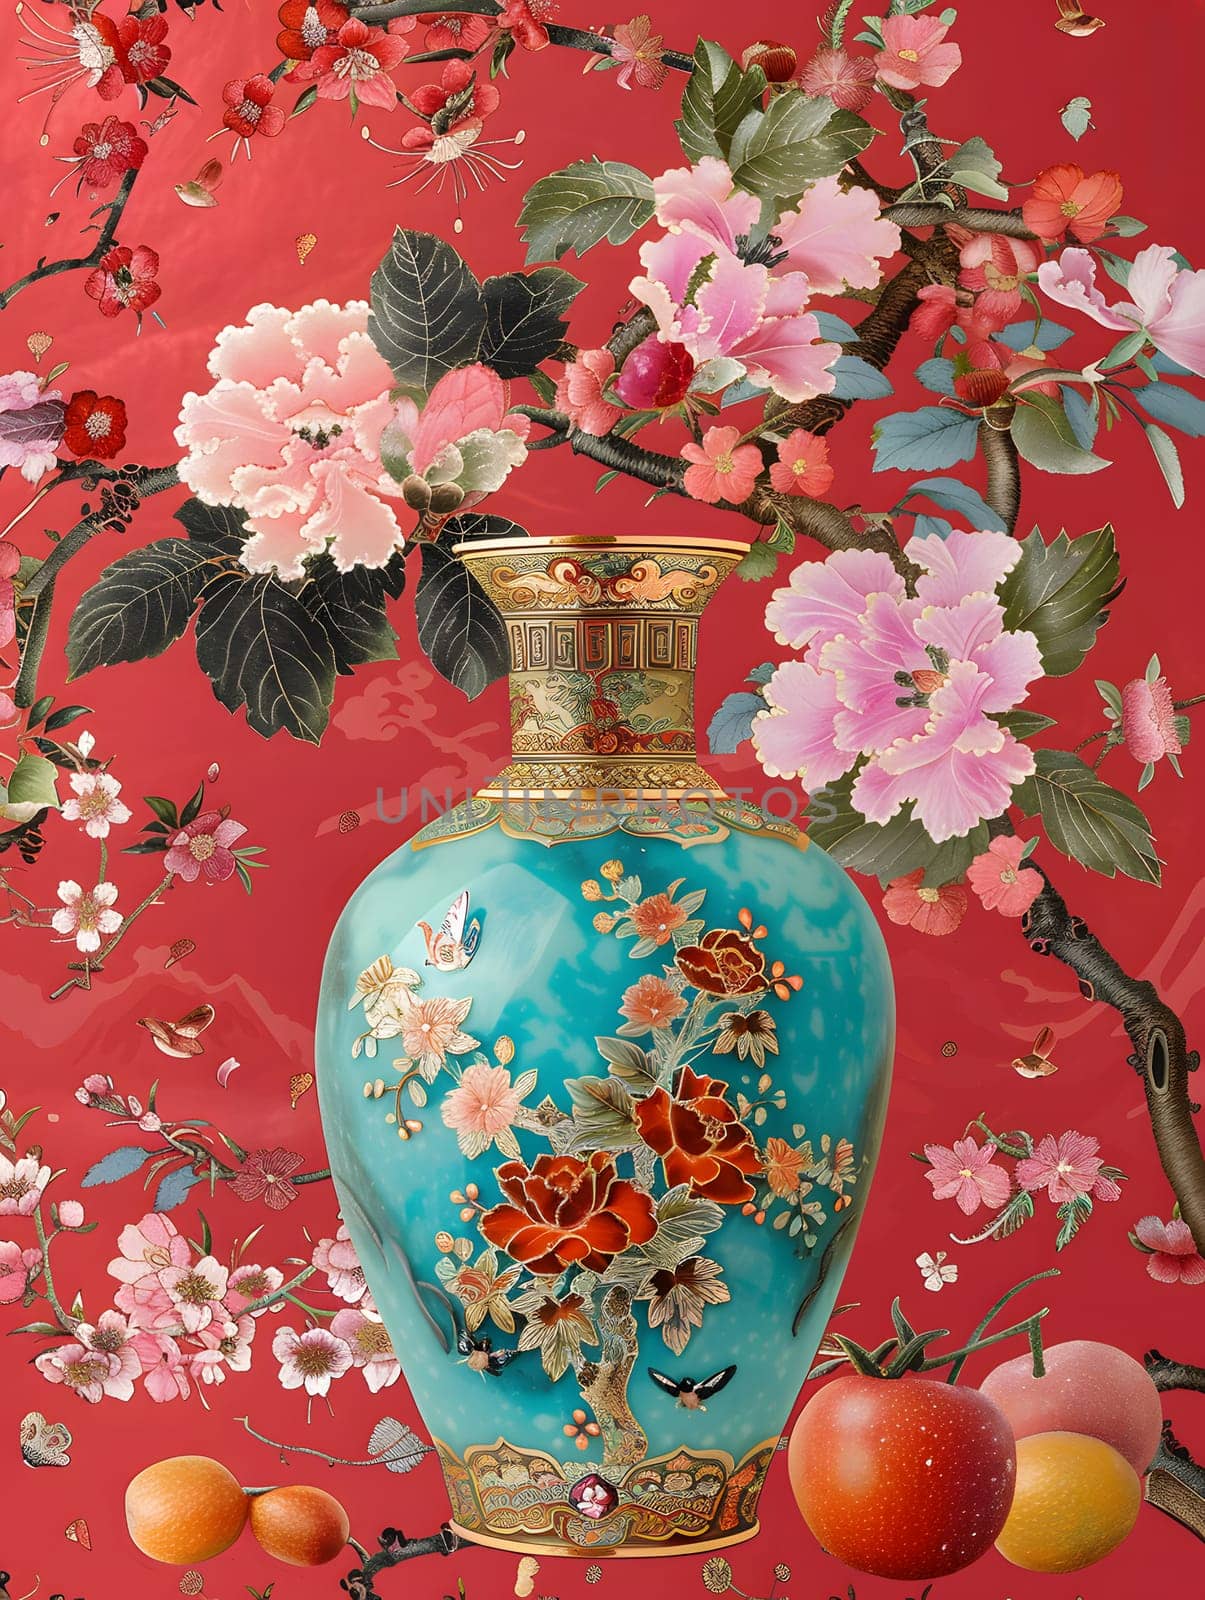 Artistic blue vase with flowers, fruit, and drinkware on red background by Nadtochiy